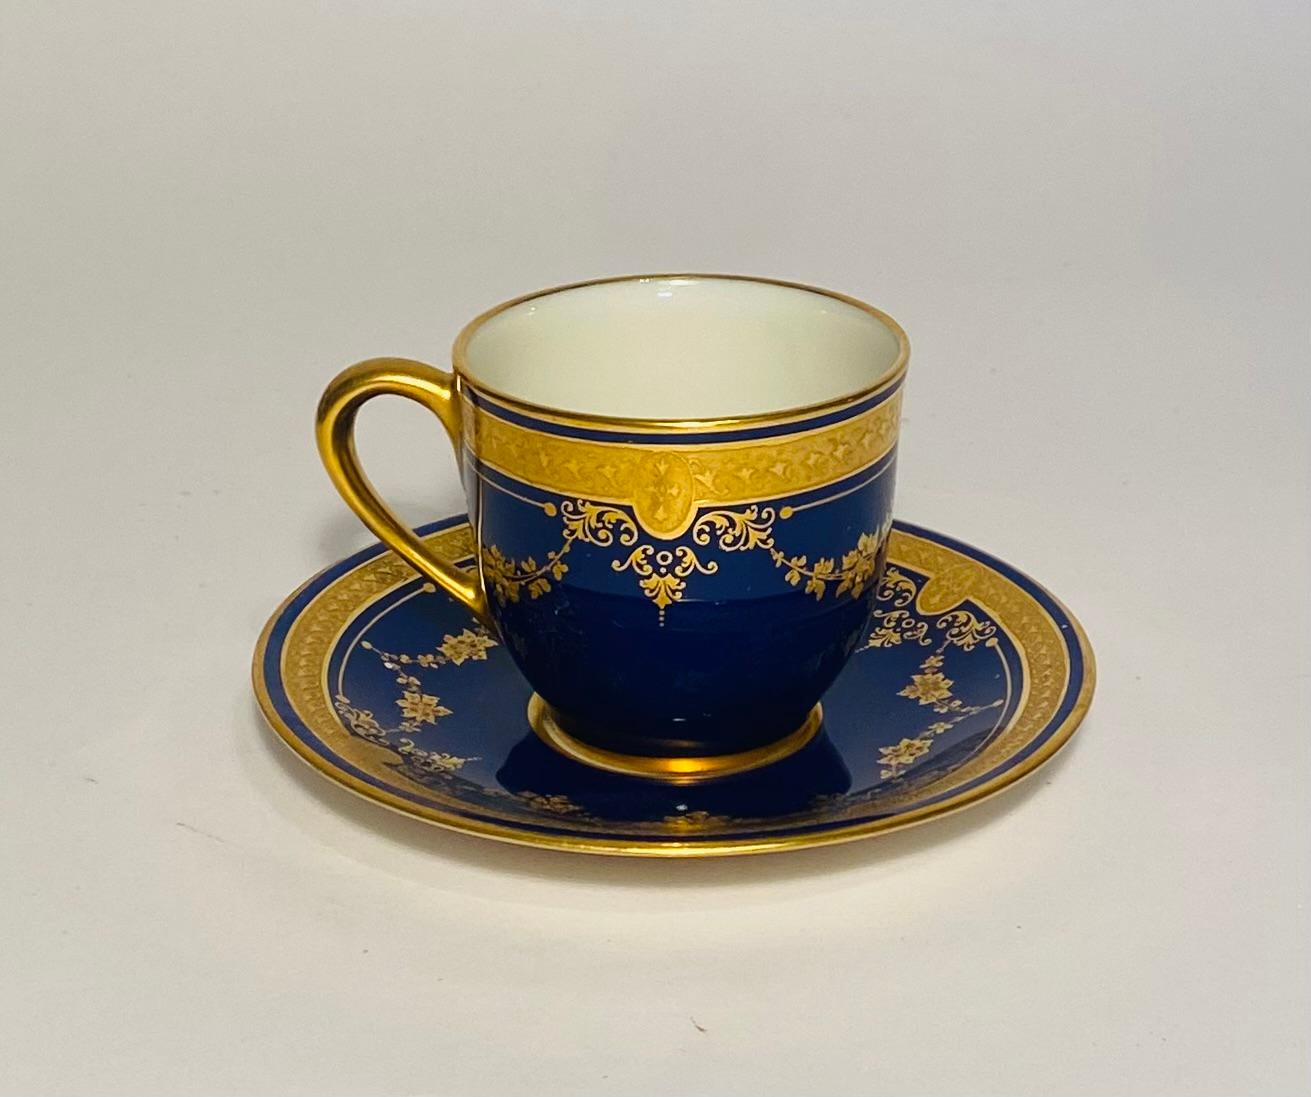 An elegant set of 11 demi cups and 11 saucers for a total of 22 pieces. Made by the American firm of Lenox for the fine Gilded Age Retailer Marshall Fields of Chicago. This set features raised gilt floral swags on a rich cobalt blue ground. We do